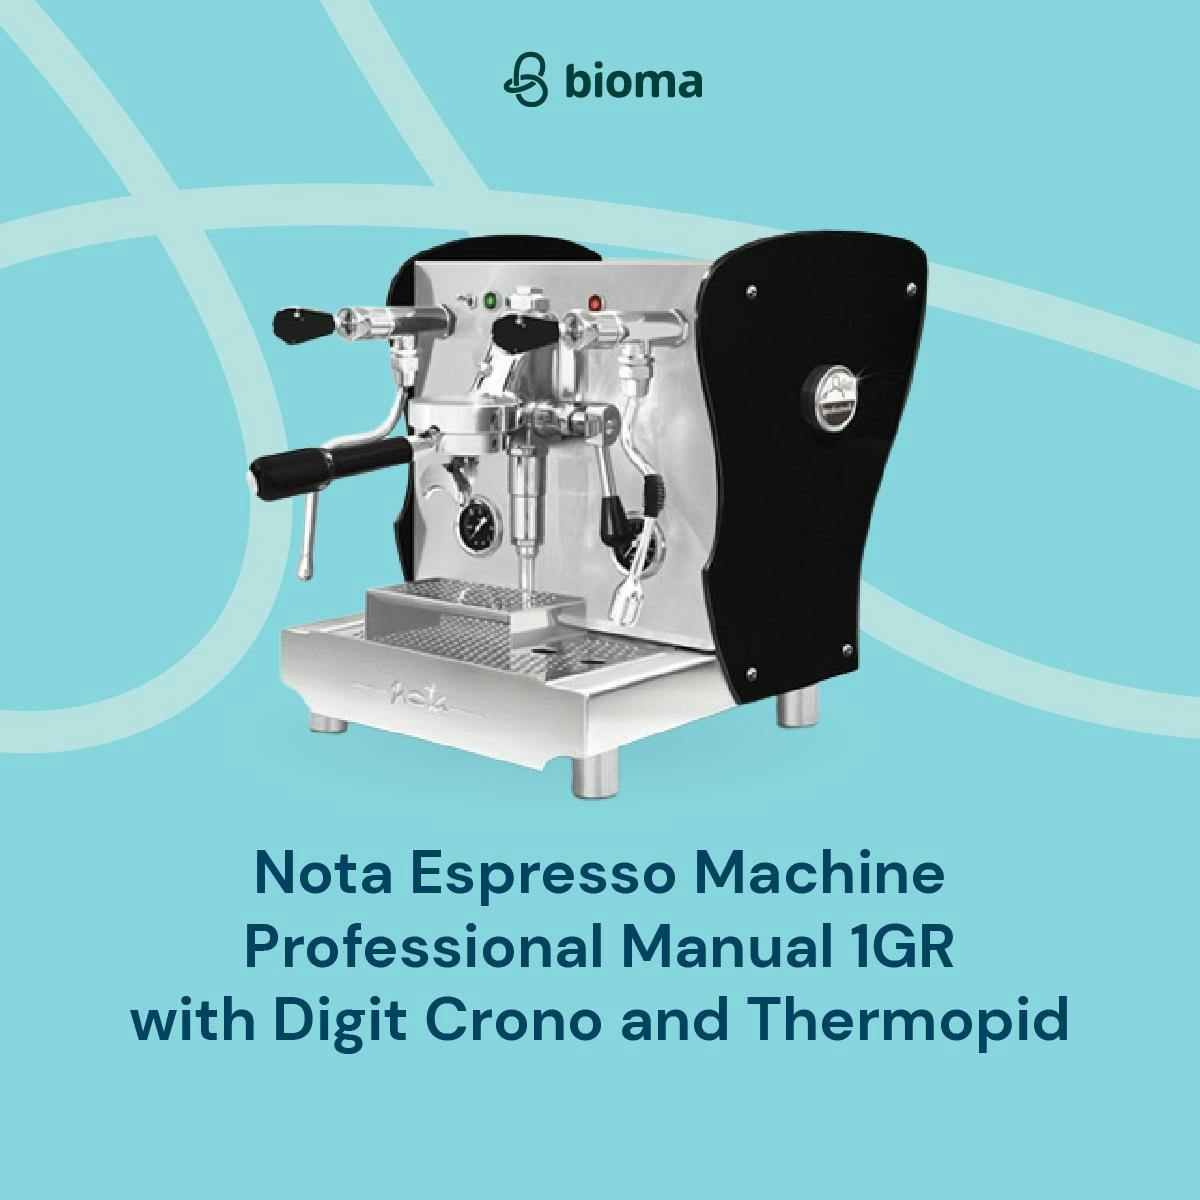 Image 50258 Nota Espresso Machine Professional Manual 1GR with Digit Crono and Thermopid (Black)